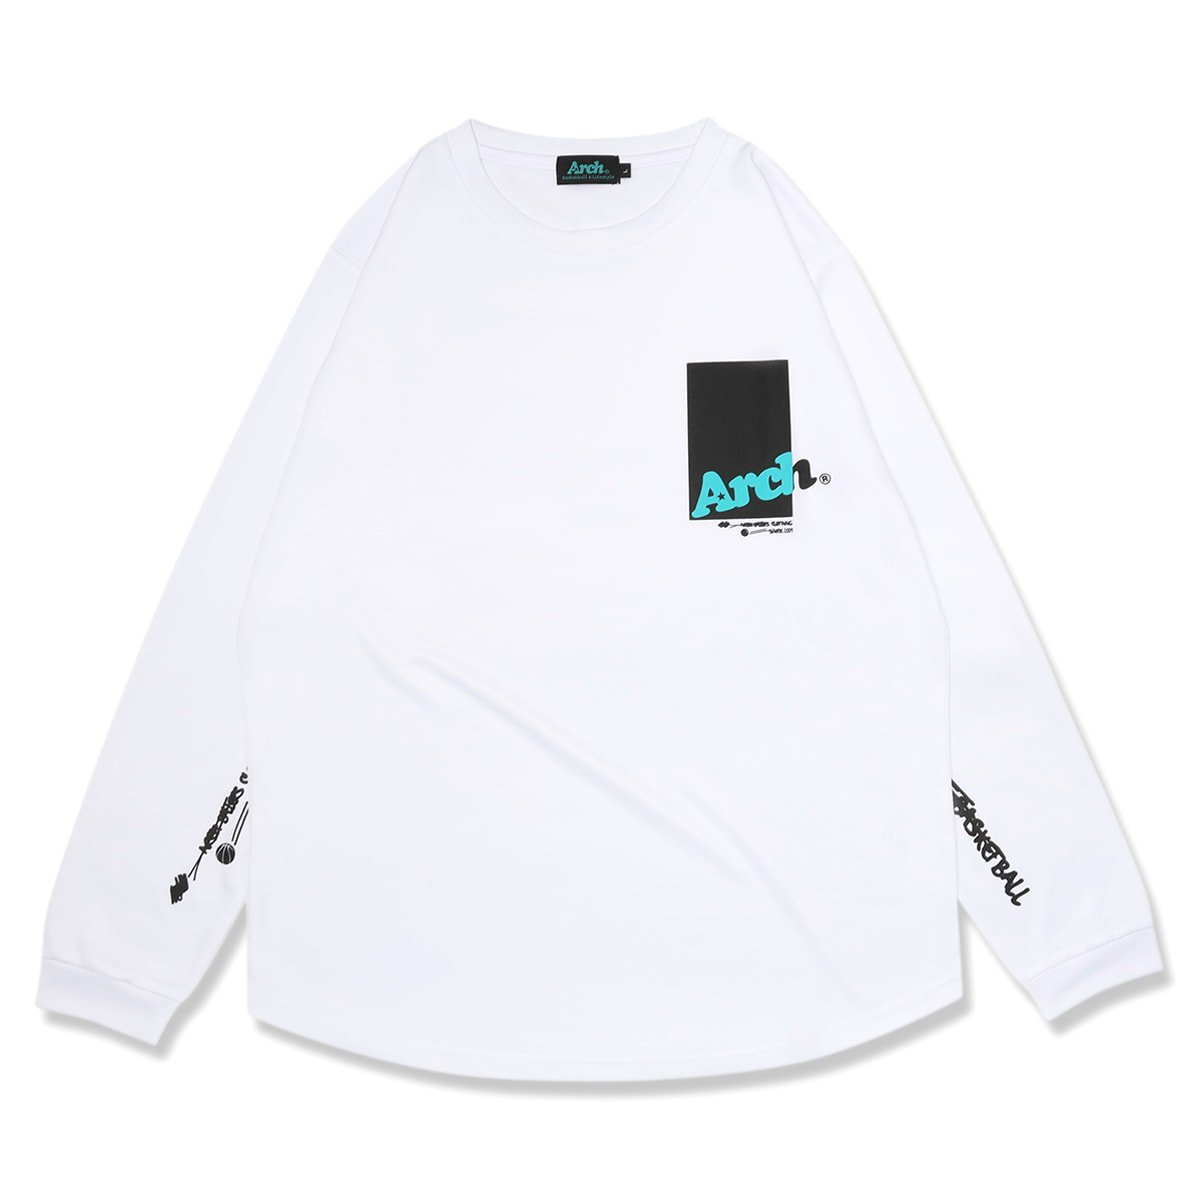 stick out L/S tee [DRY]【white】 Arch ☆ アーチ [バスケットボール＆ライフスタイルウェア  BasketballLifestyle wear]